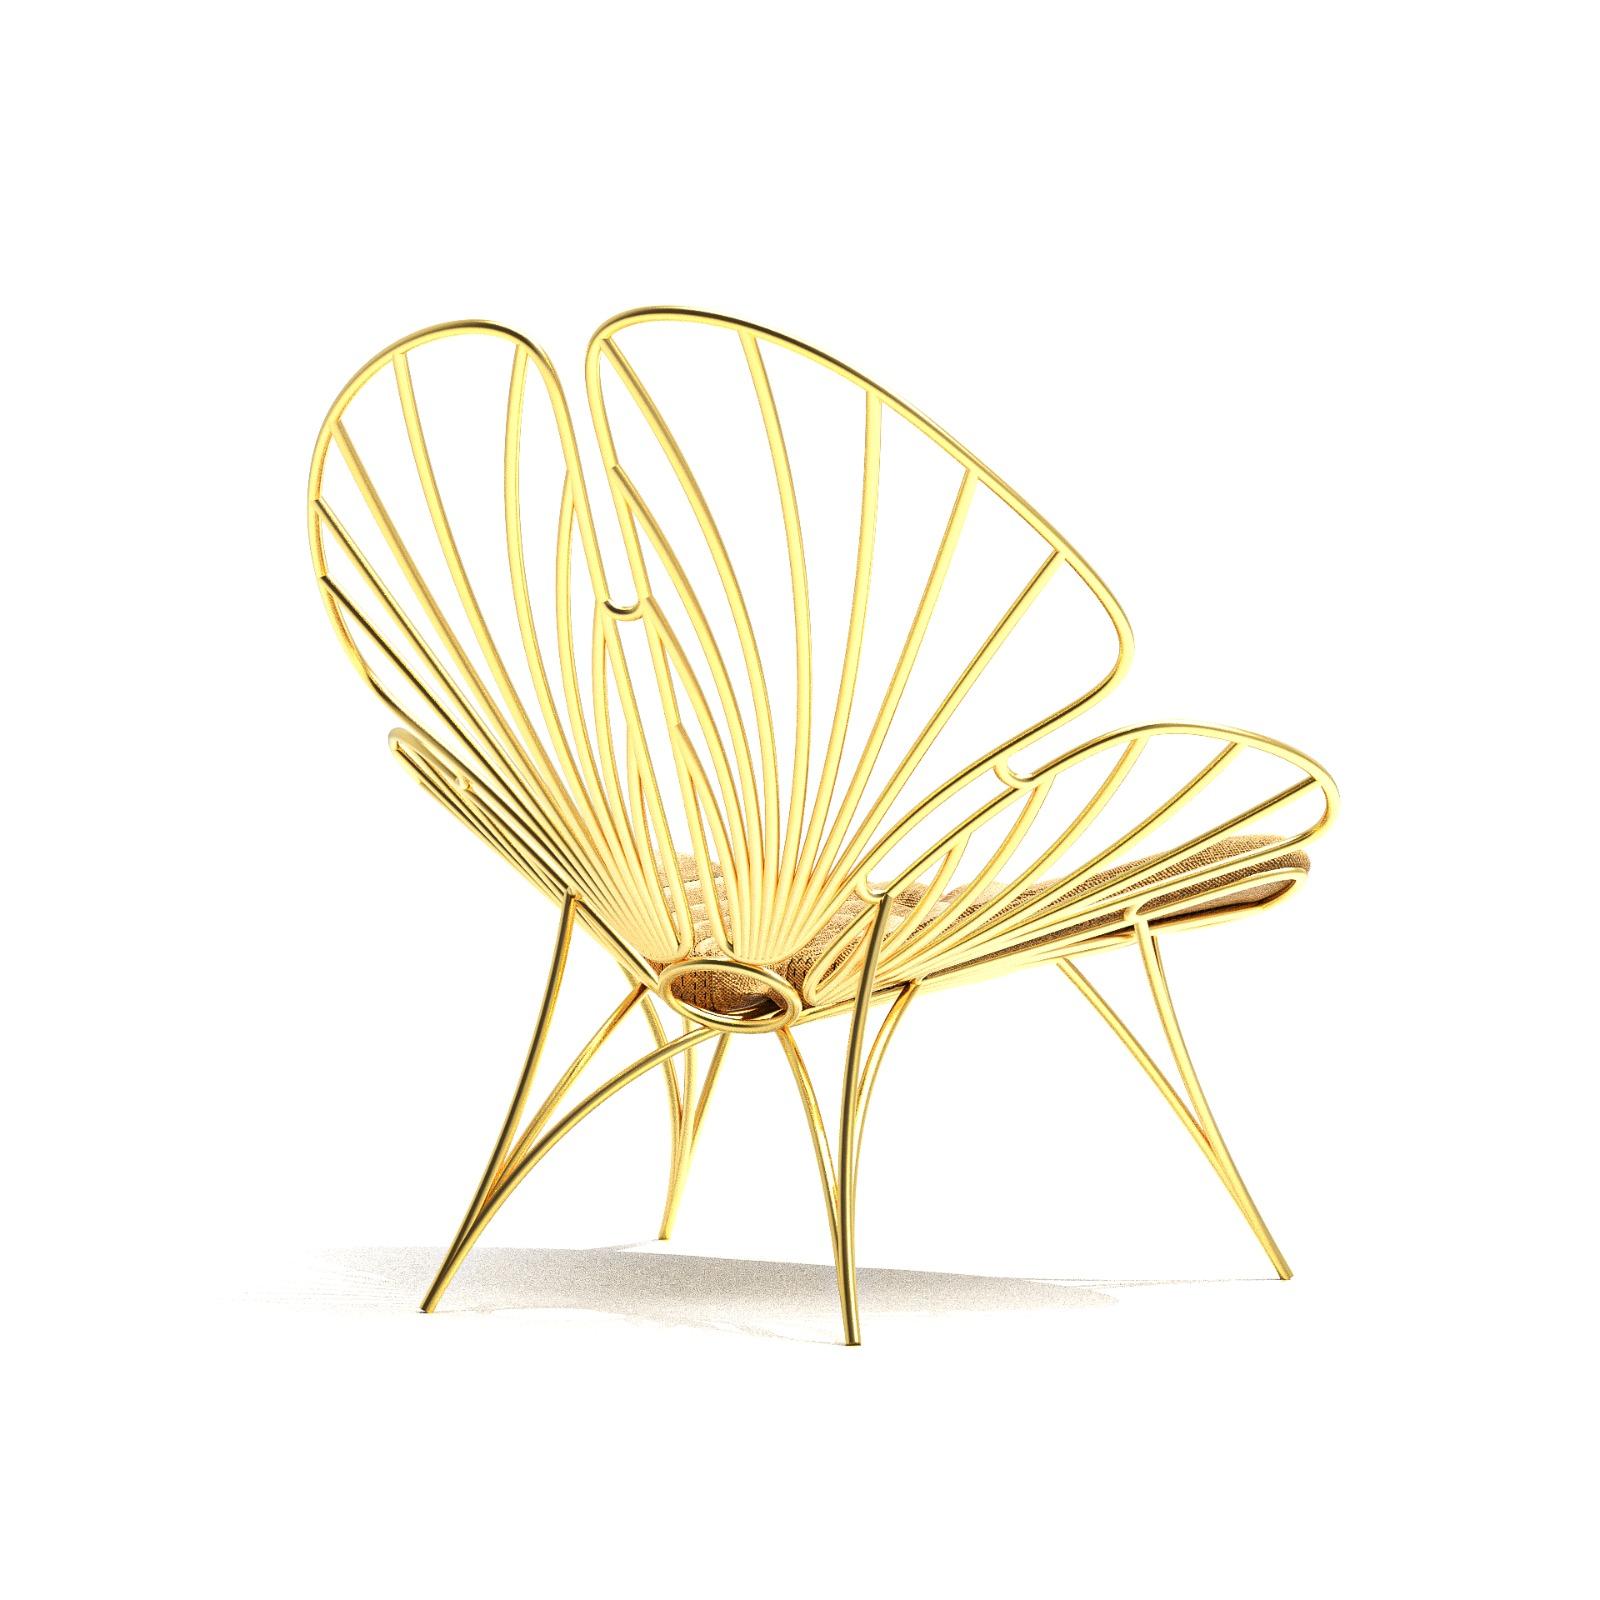 Cigarra Armchair - In gold In New Condition For Sale In Campina Grande, Paraiba